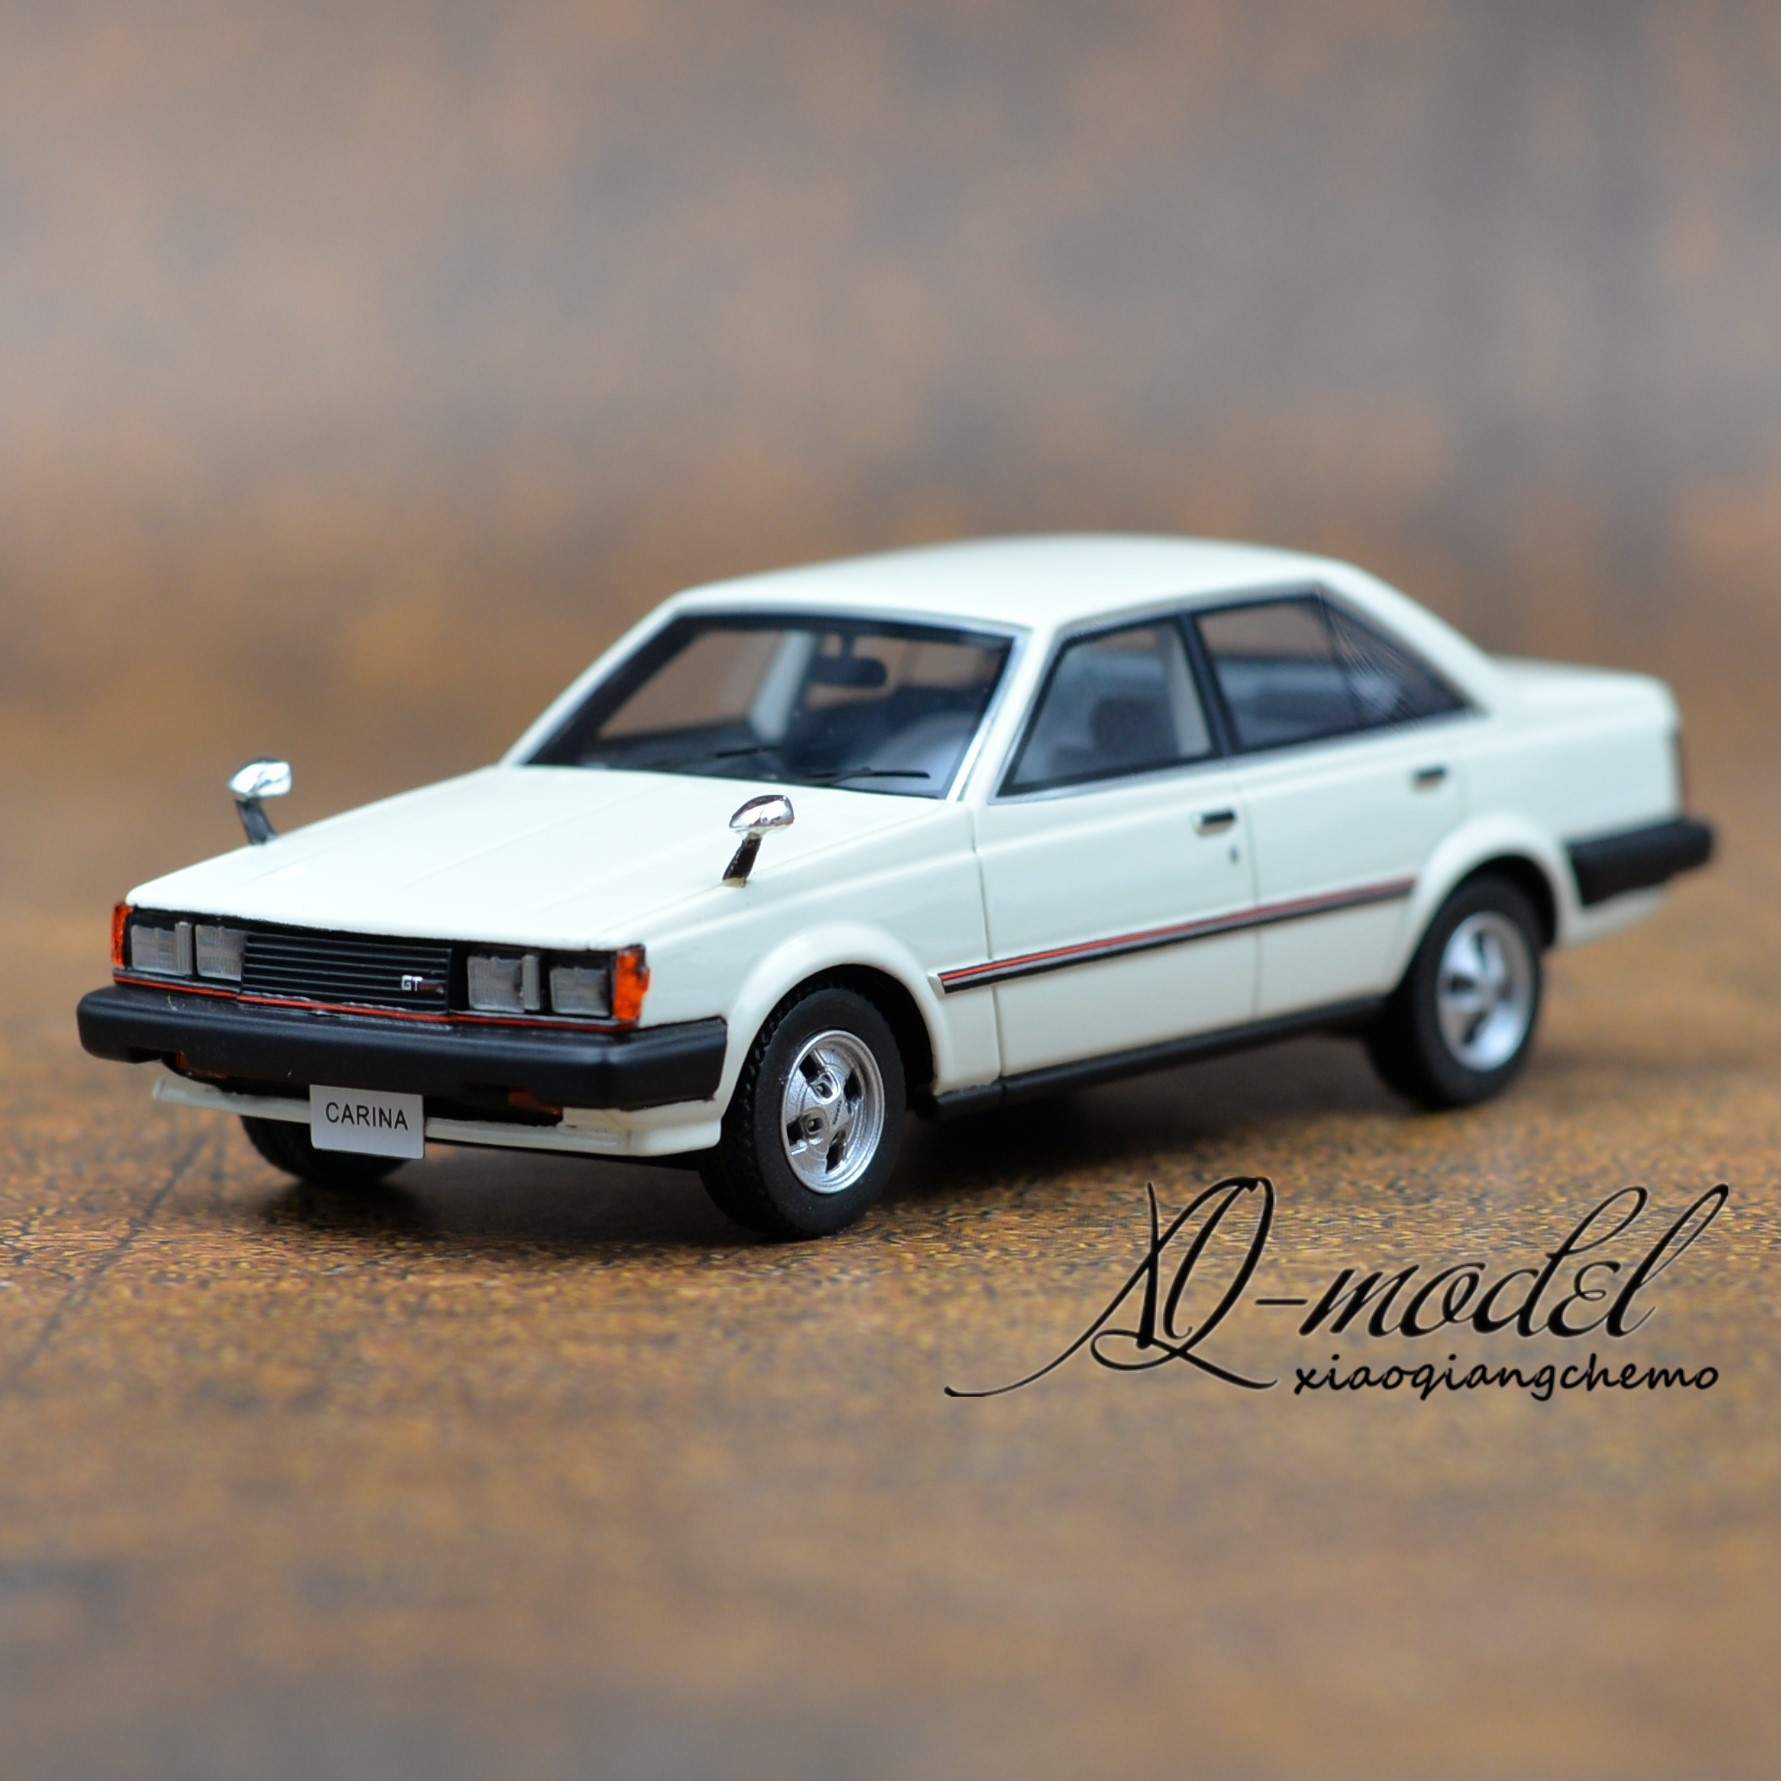 1/43 Resin Die Casting Simulation Car Model Wits Karina TOYOTA Carina 1600GT High-end Collection Display Gifts alx